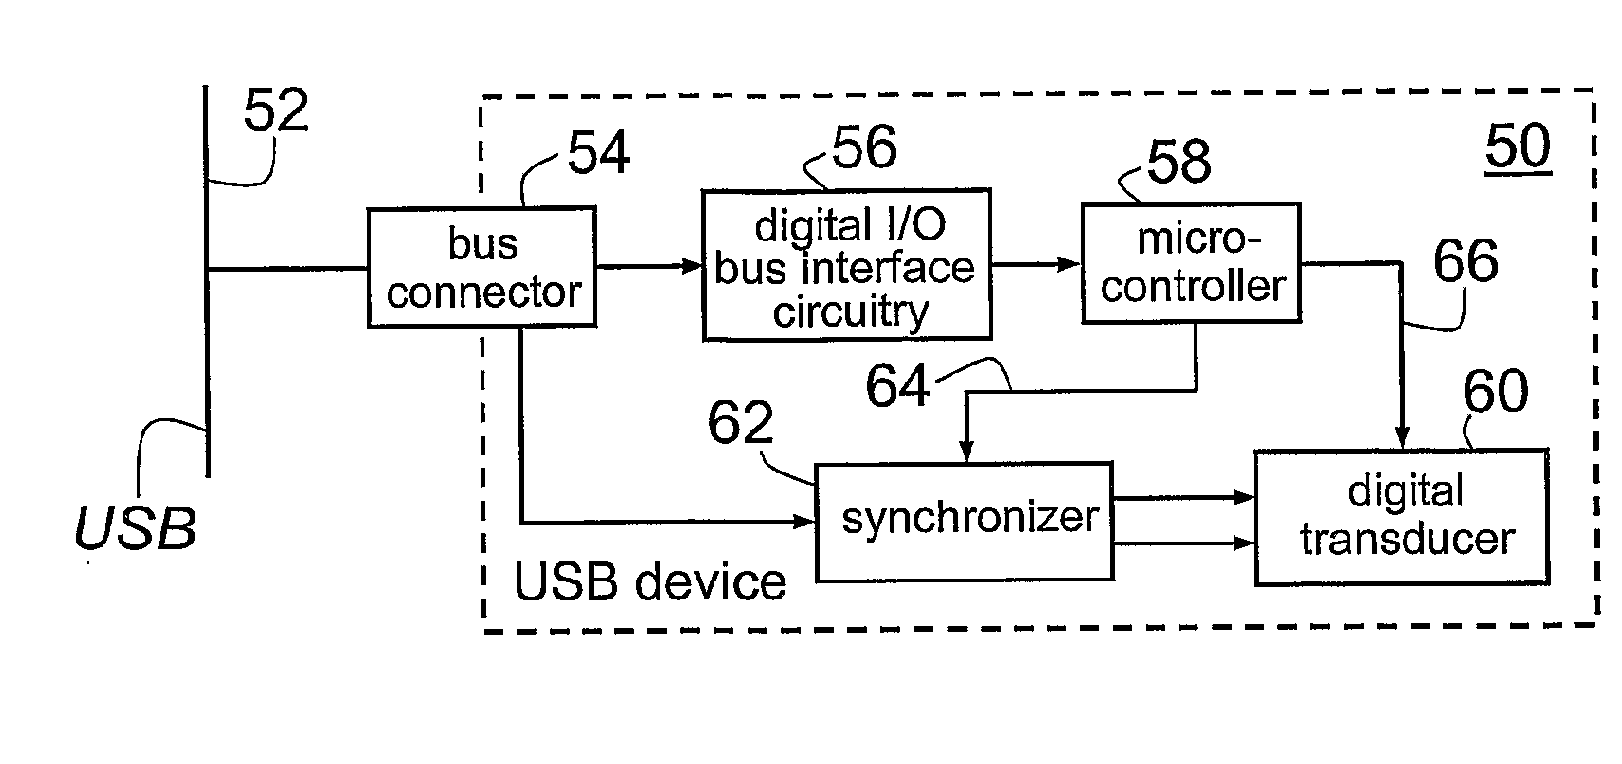 Distributed synchronization and timing system